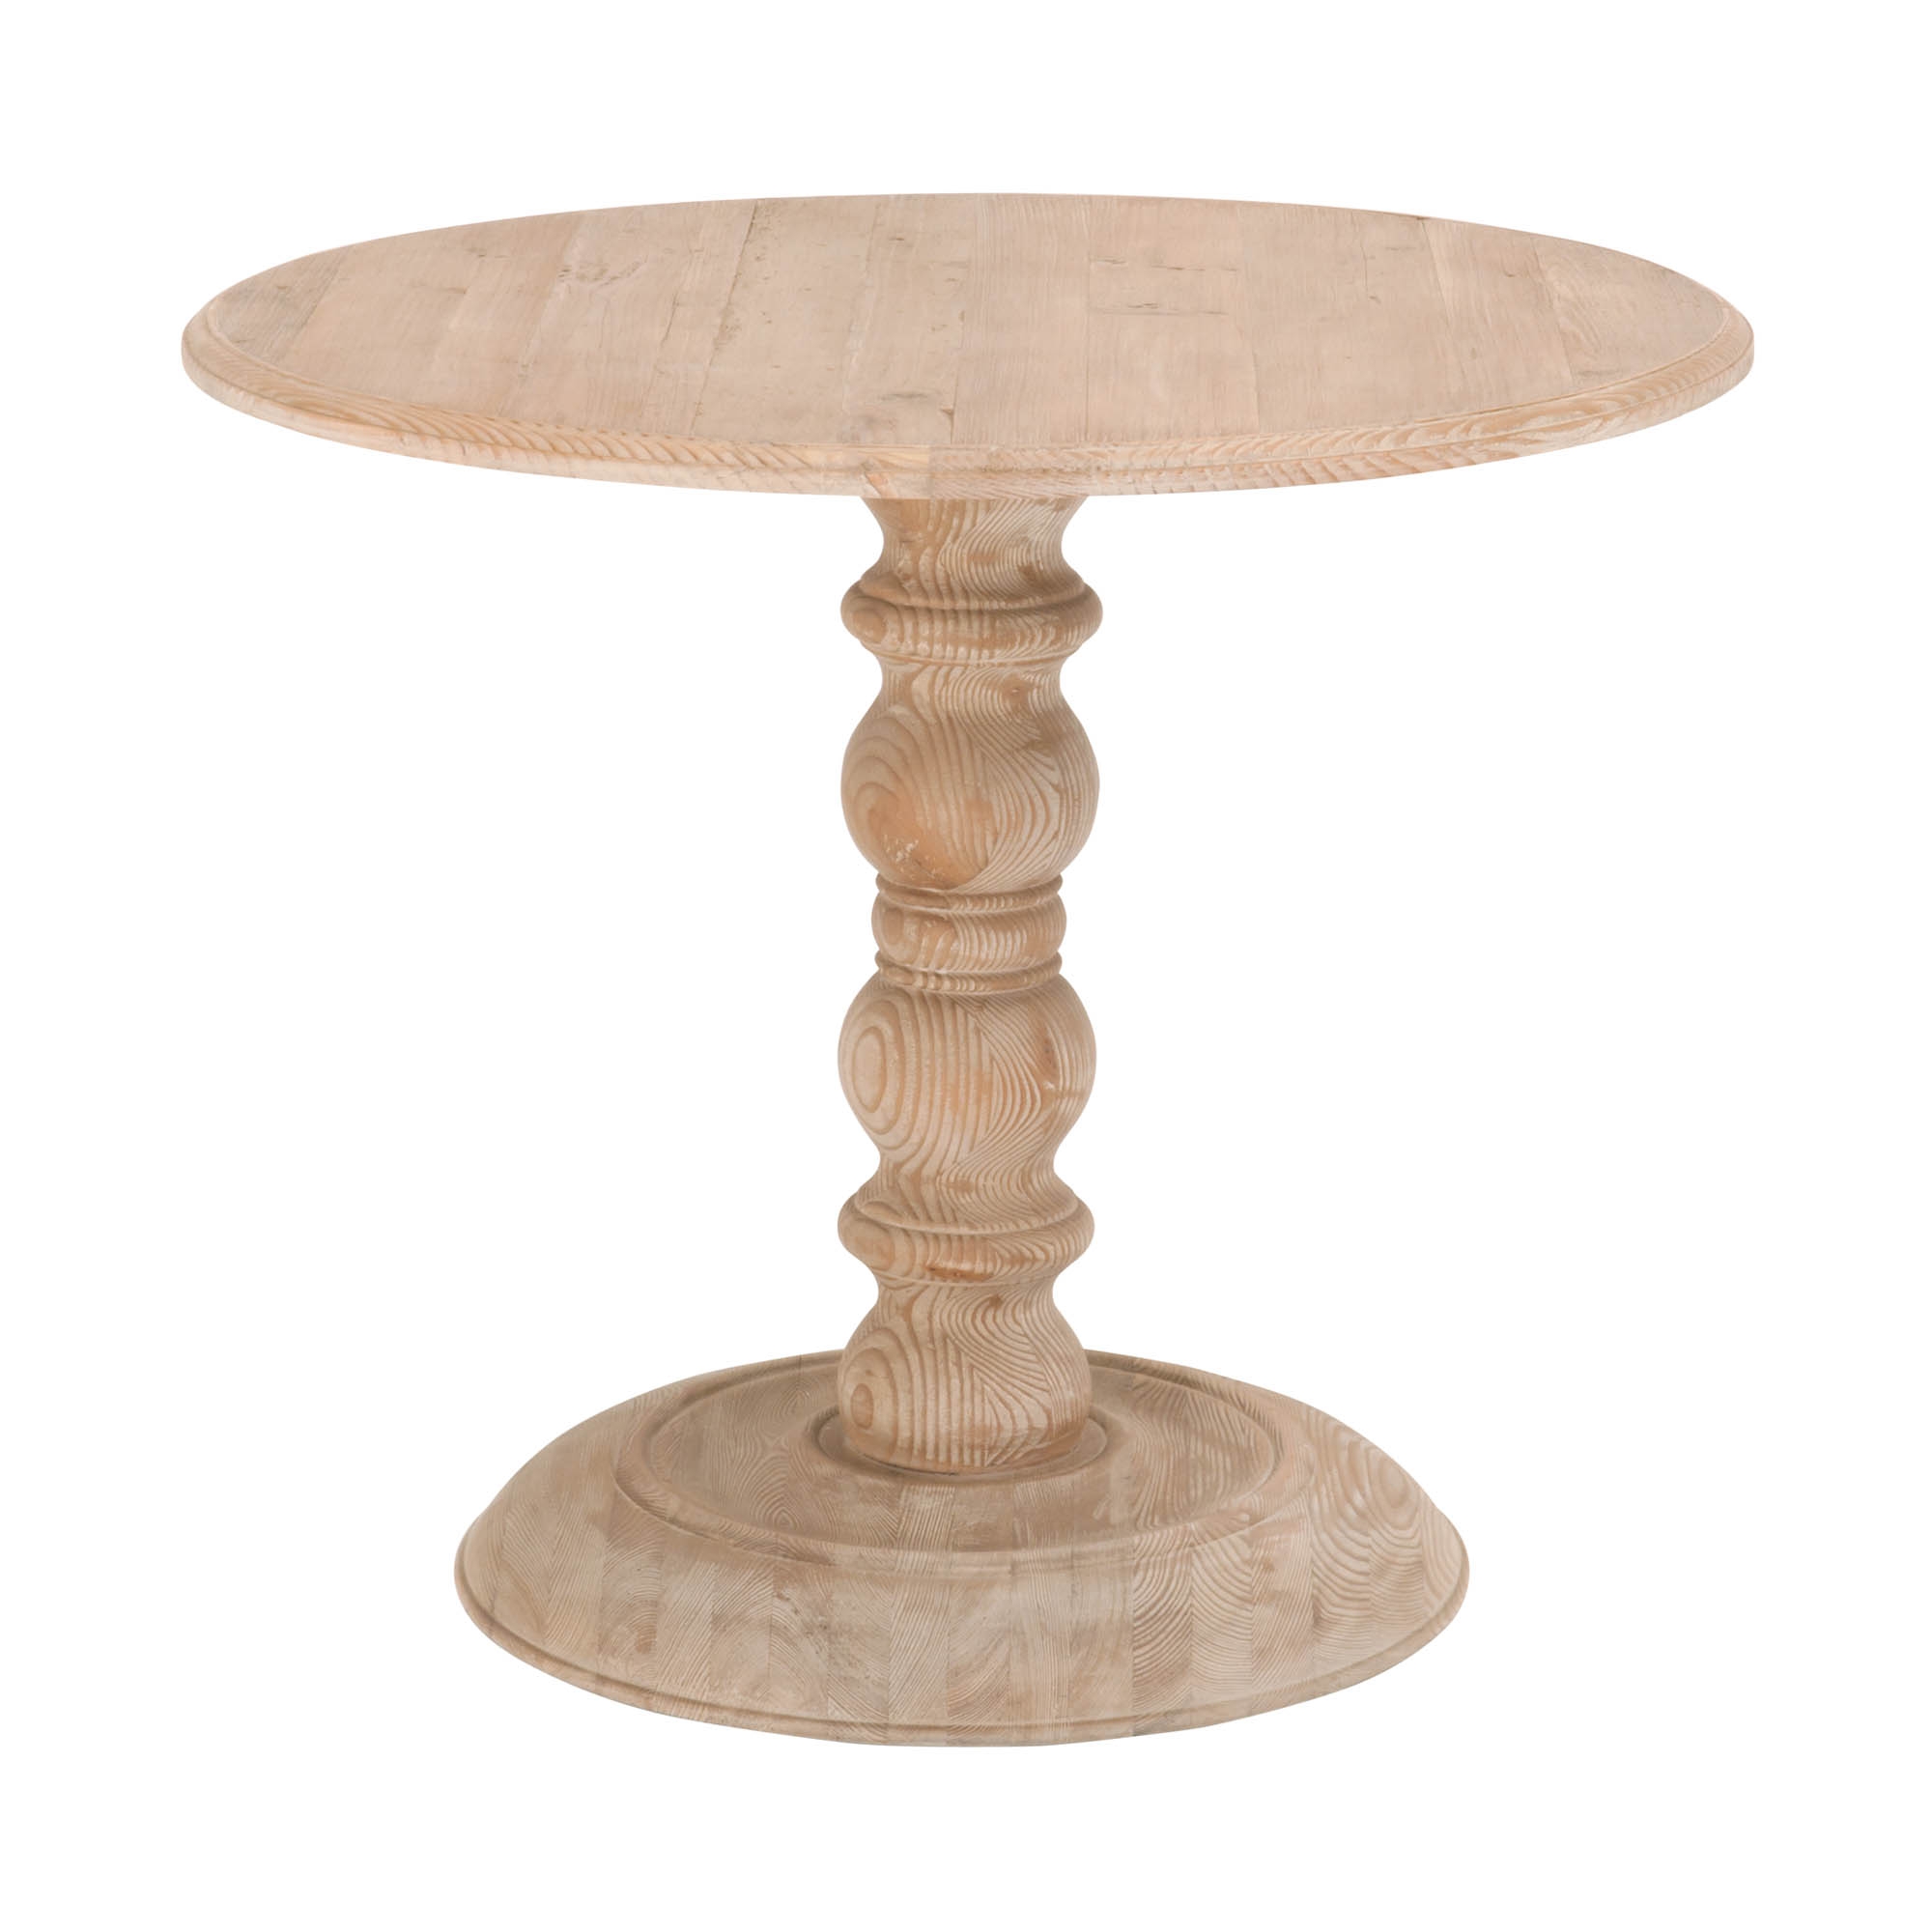 CHELSEA 36" ROUND DINING TABLE - Image 2